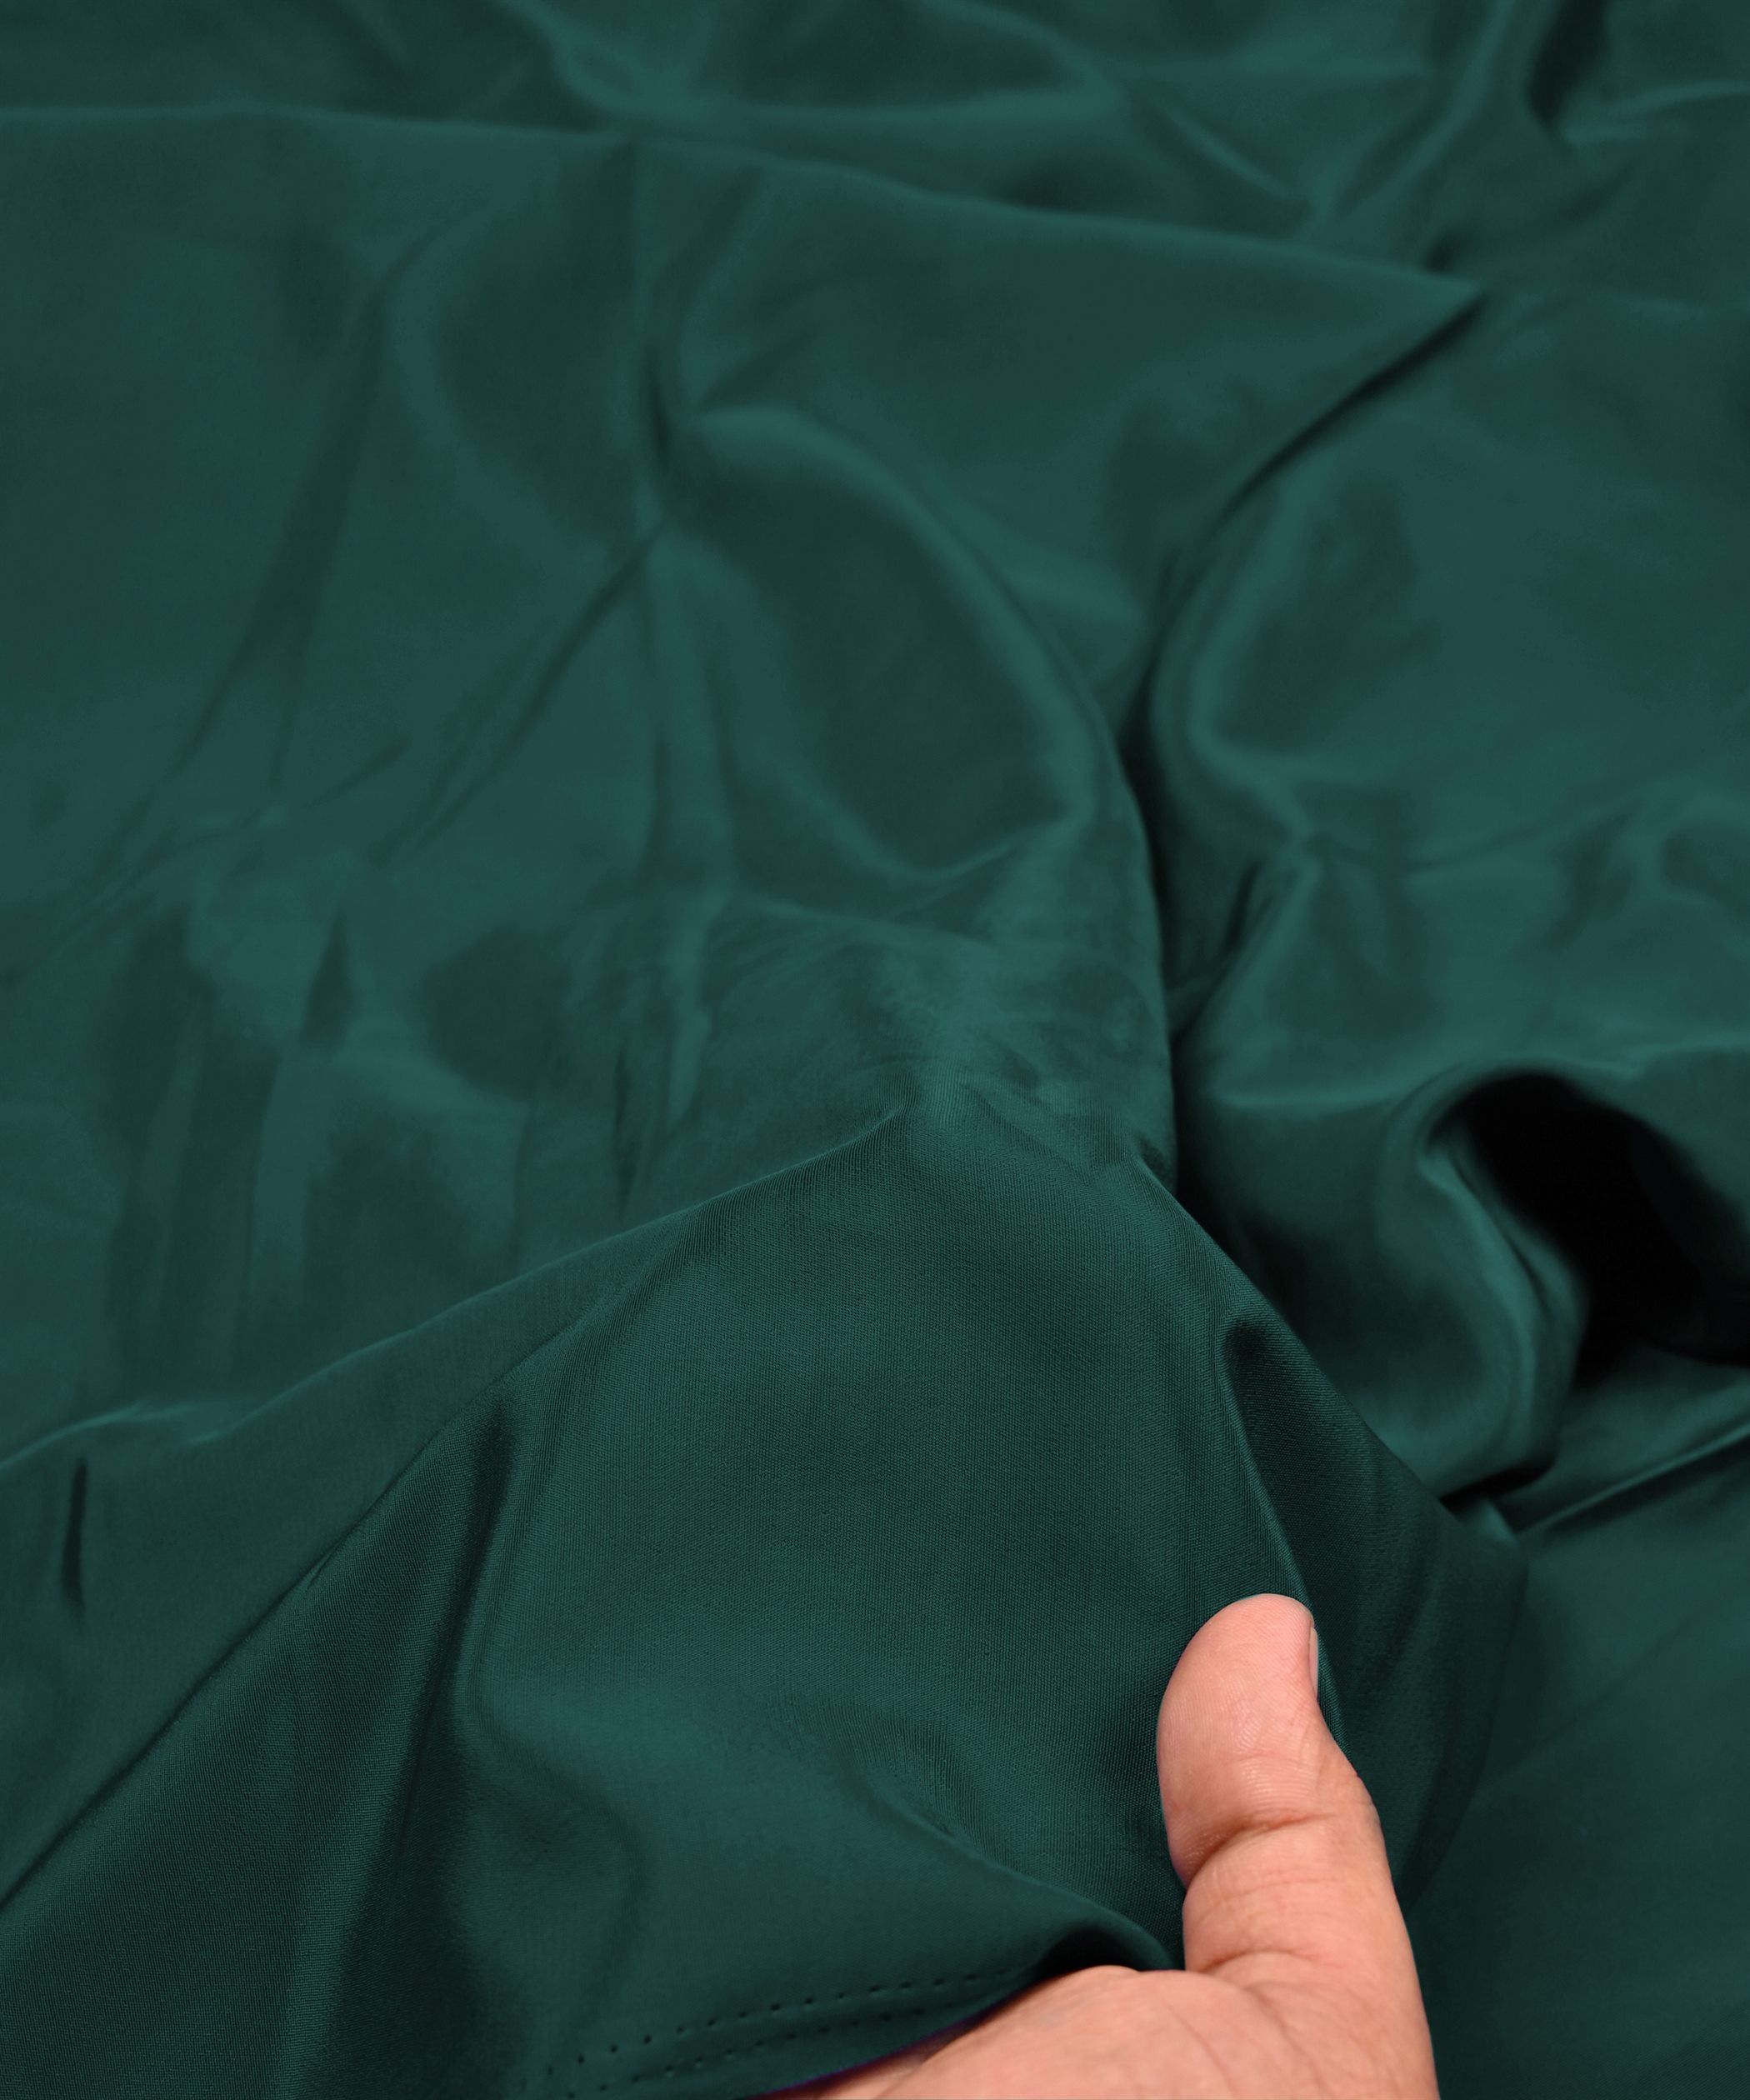 Teal Plain Dyed American Crepe Fabric